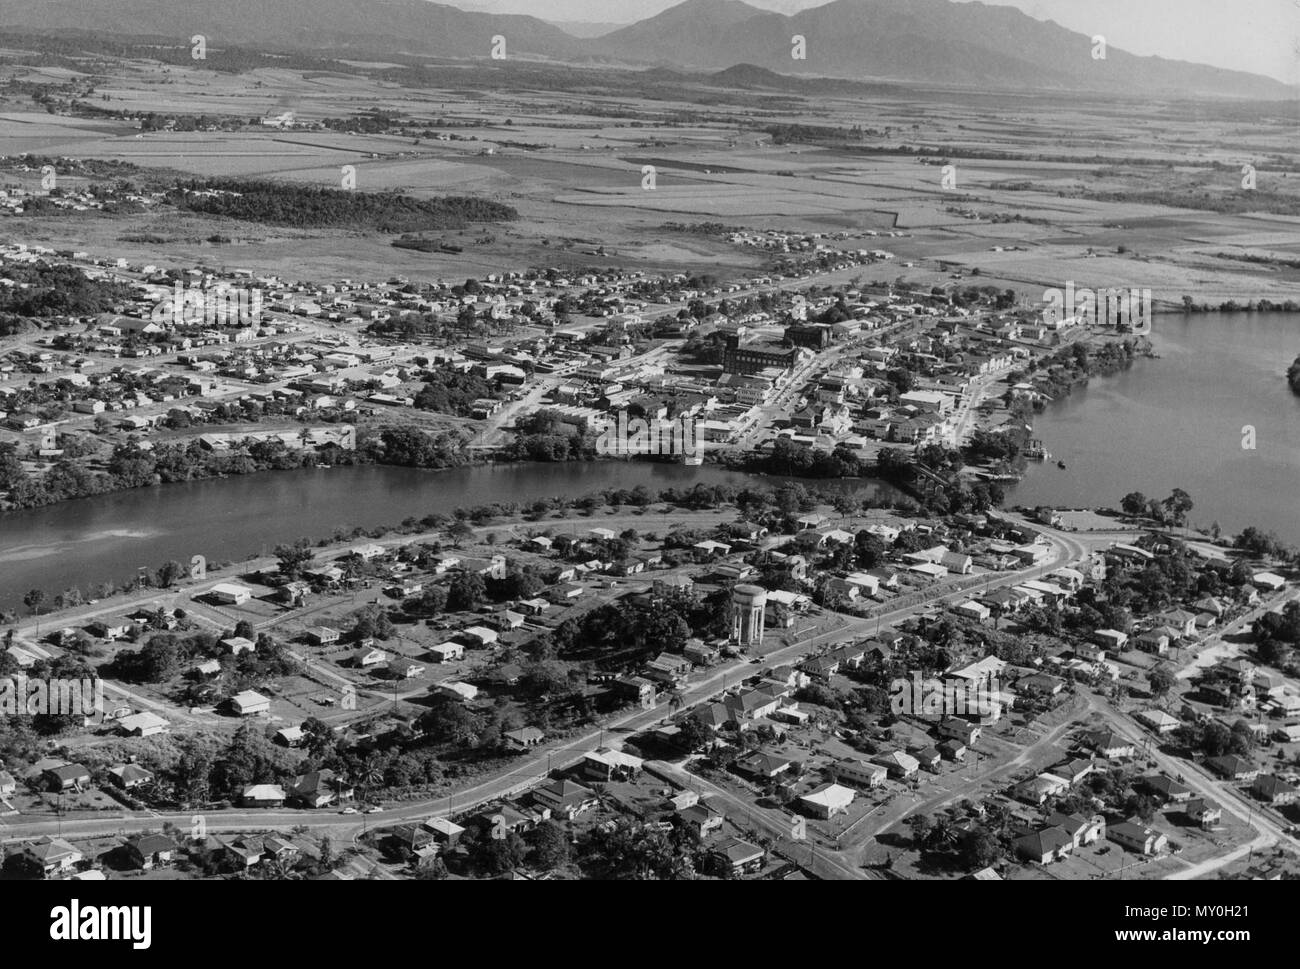 Aerial view of Innisfail, c 1946. The Evening Advocate 27 May 1946  Innisfail May Have Air Feeder Planes 212281075 )   Notice that Innisfail is to be included in the Australian National Airways service in the future was received at Thursday's monthly meeting of the Johnstone Shire Council.  The Chairman, Cr. C. J. Duffin, remarked It is pleasing to see that Innisfail has not been forgotten and that we still may get some recognition. Stock Photo